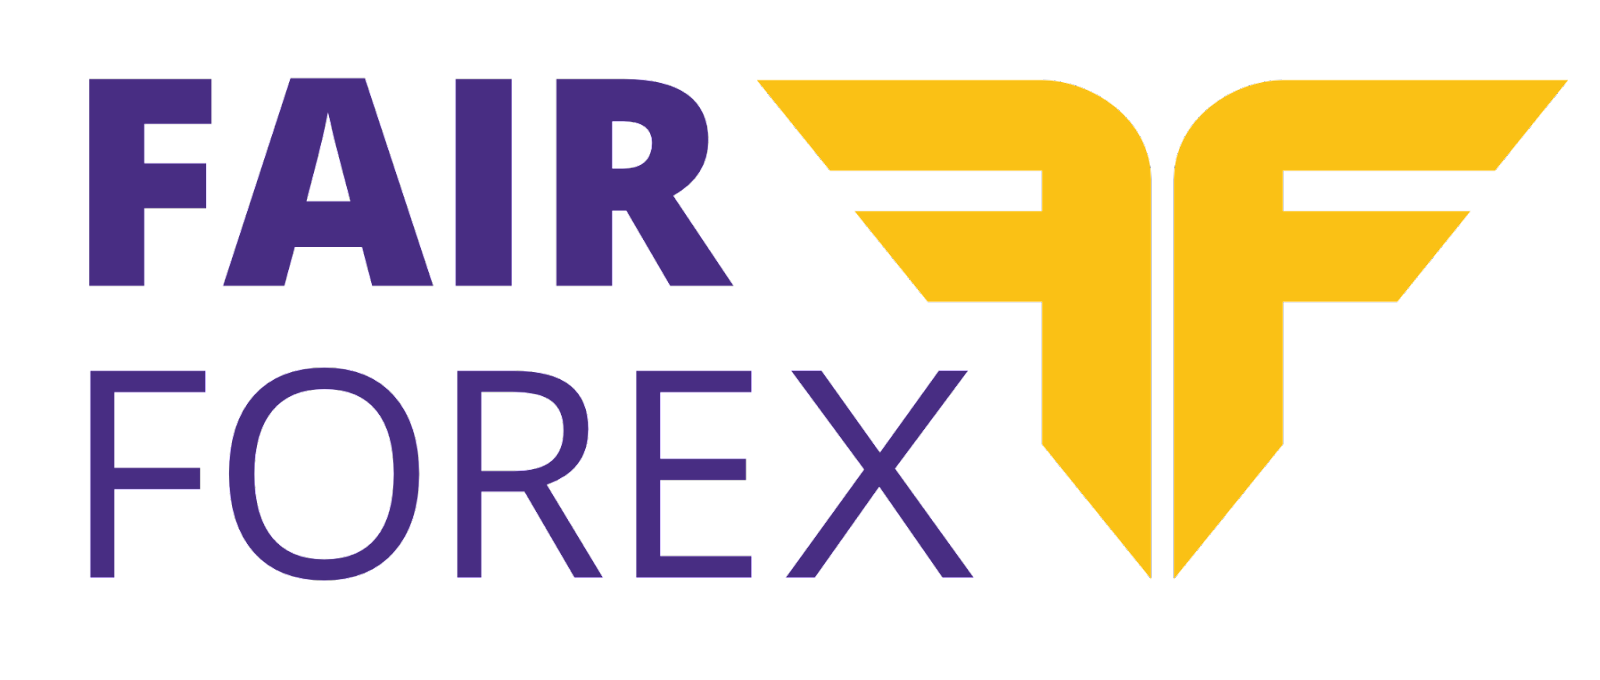 Fair Forex, Monday, January 3, 2022, Press release picture